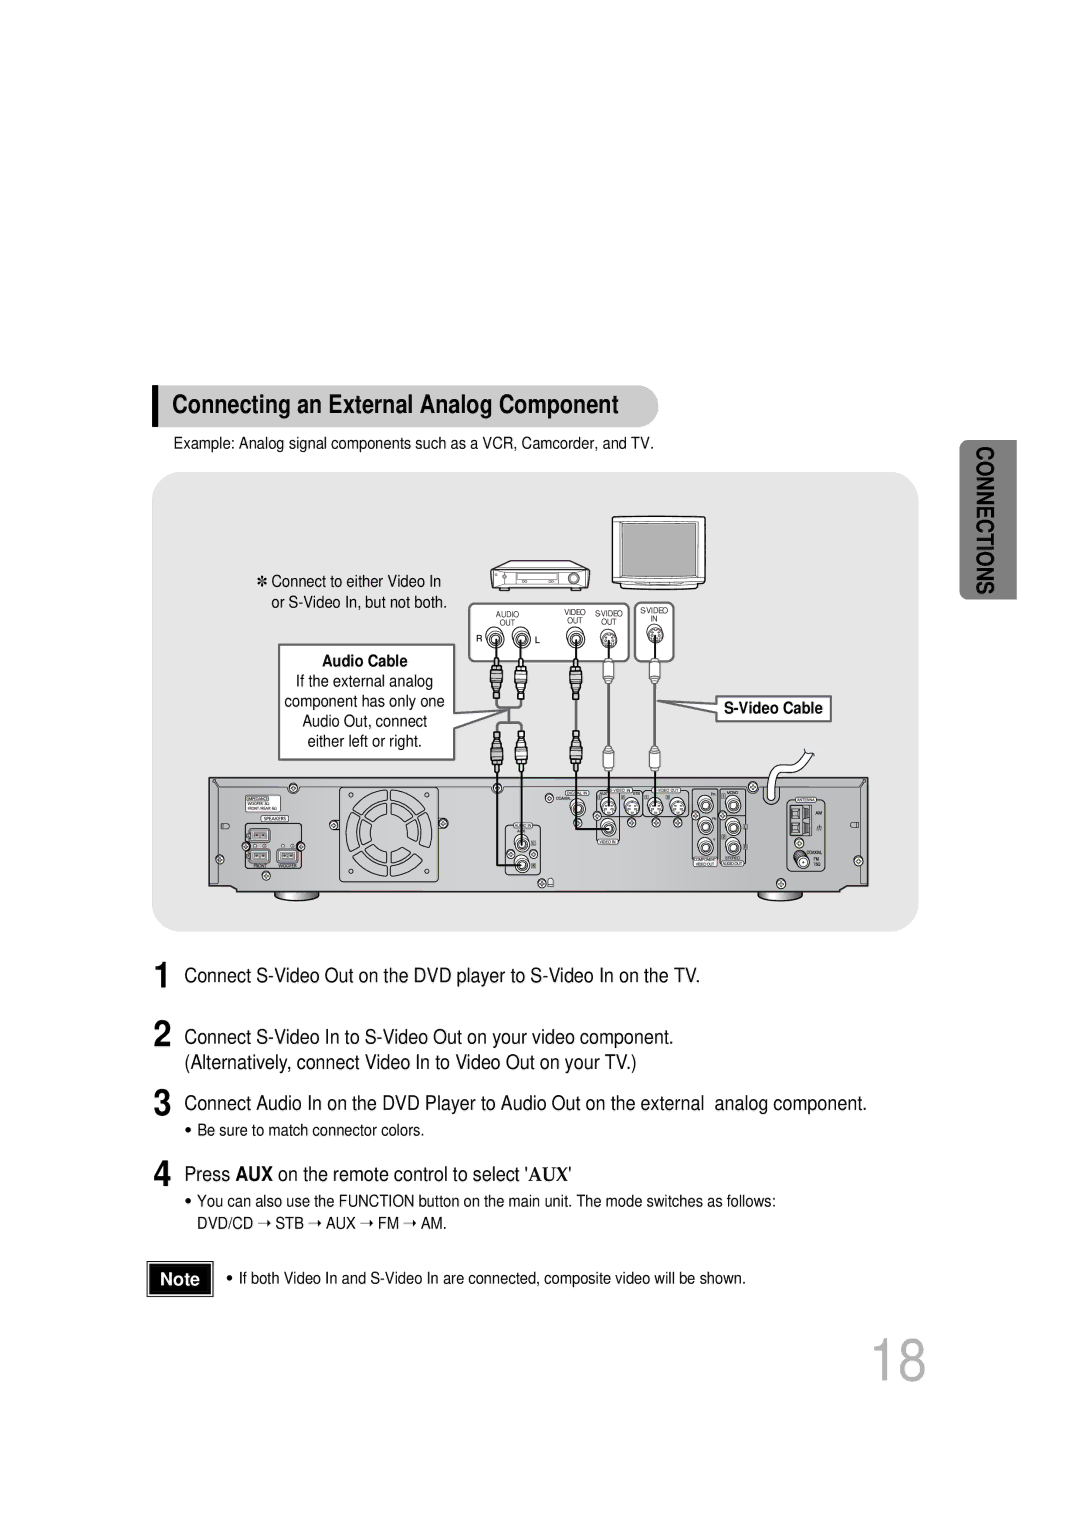 Samsung HT-DB400M instruction manual Connecting an External Analog Component, Or S-Video In, but not both 